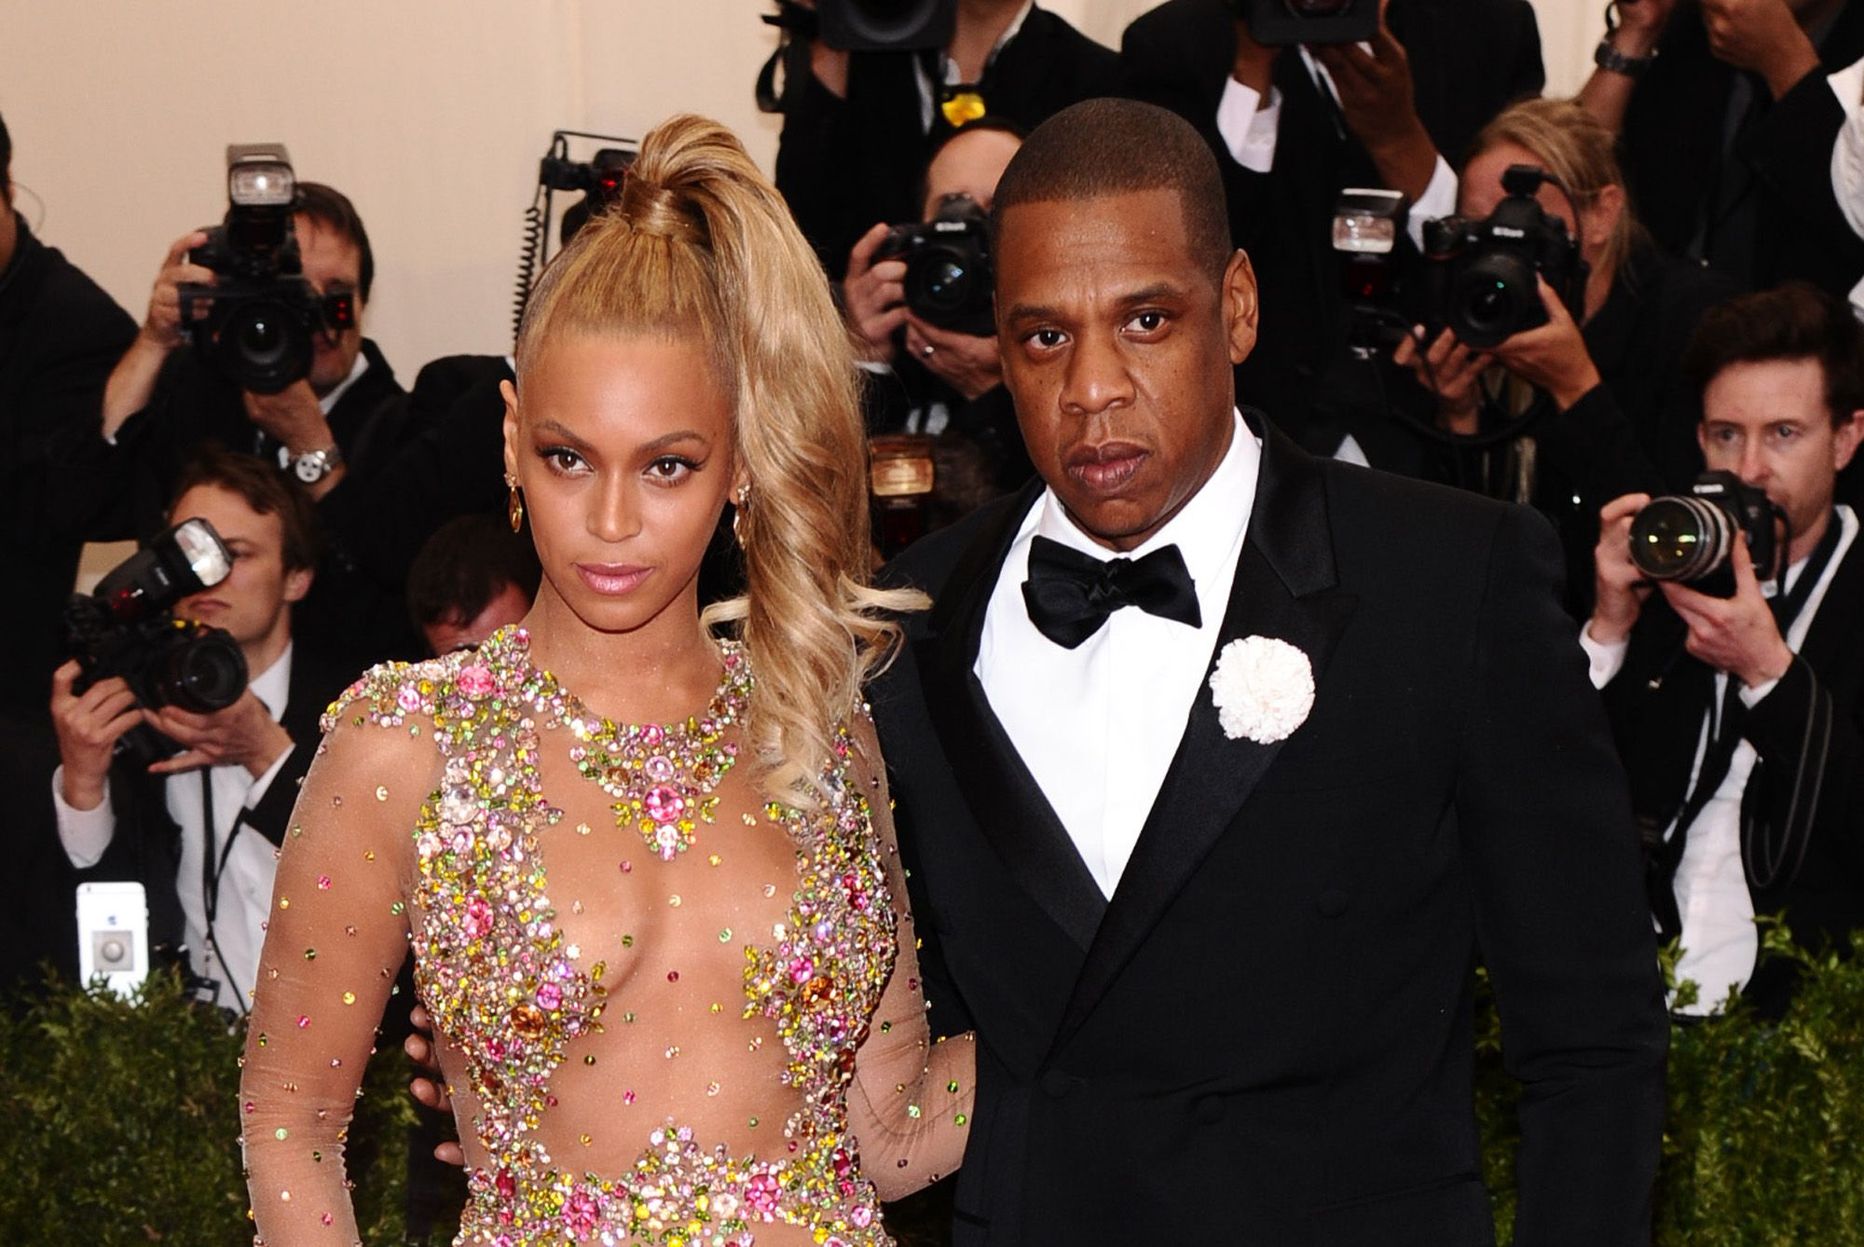 Beyonce, left, and Jay-Z arrive at The Metropolitan Museum of Art's Costume Institute benefit gala celebrating "China: Through the Looking Glass" on Monday, May 4, 2015, in New York. (Photo by Charles Sykes/Invision/AP)